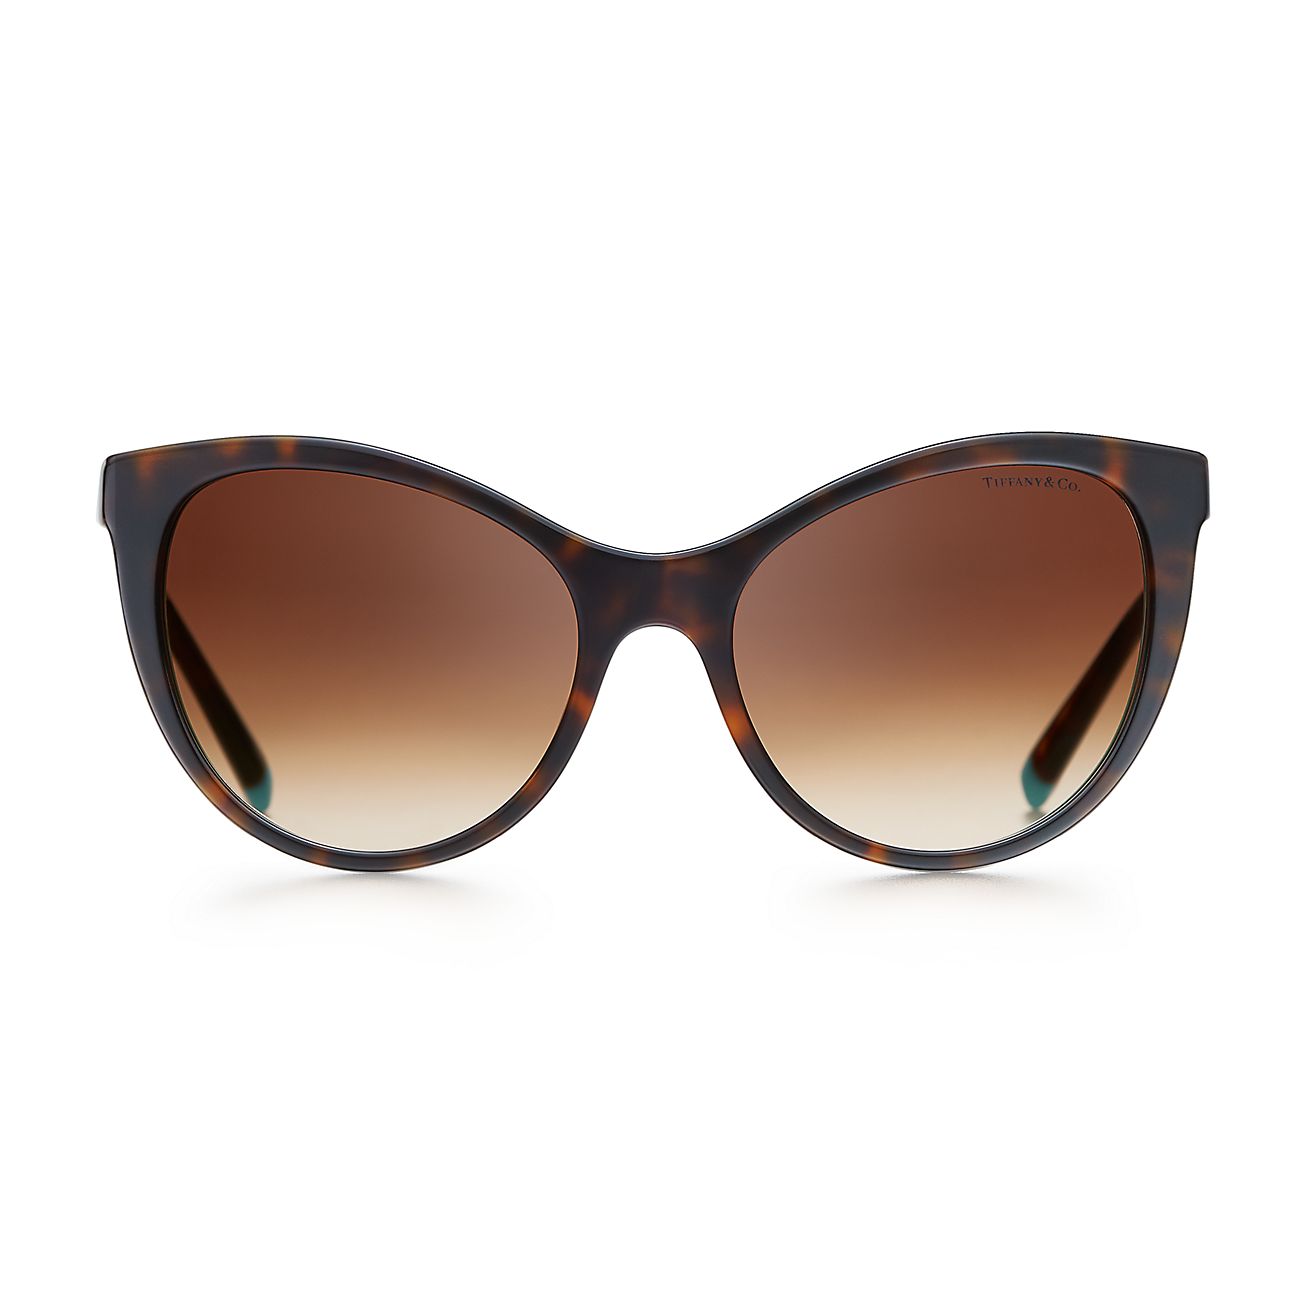 Diamond Point butterfly sunglasses in 